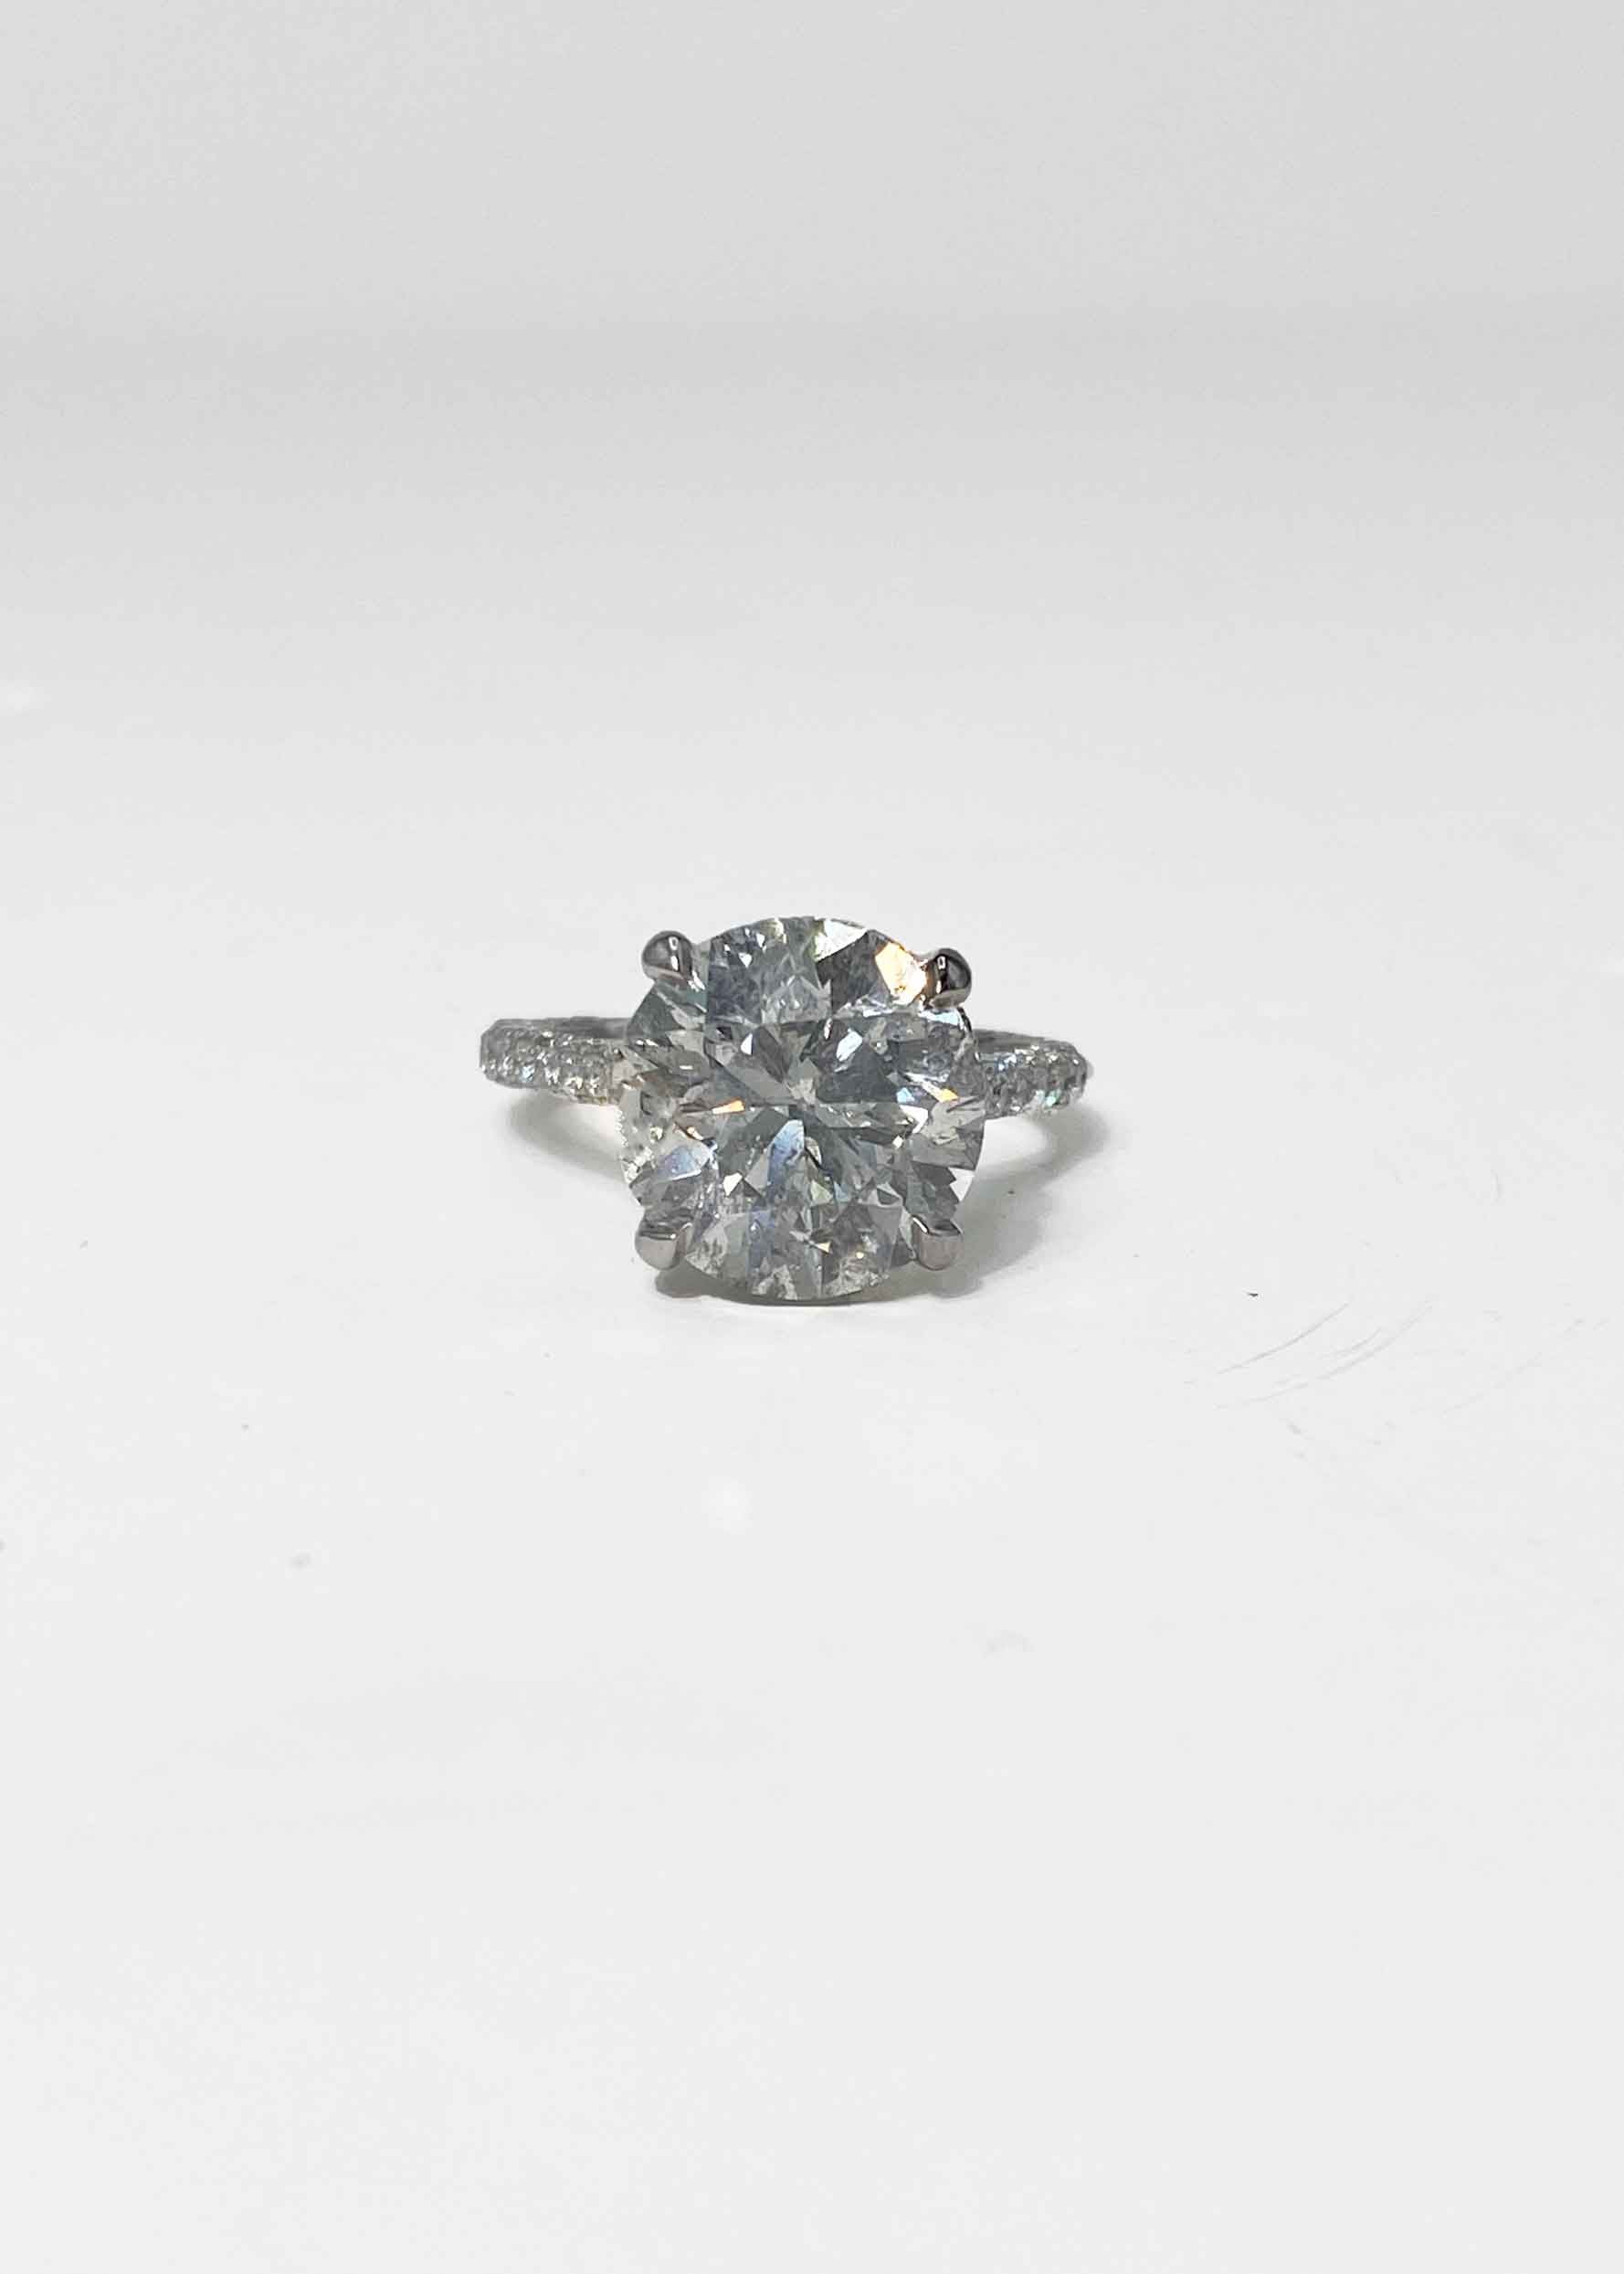 Engagement Ring 5.01 Round Center Stone with .96 Side Stones I color AGS